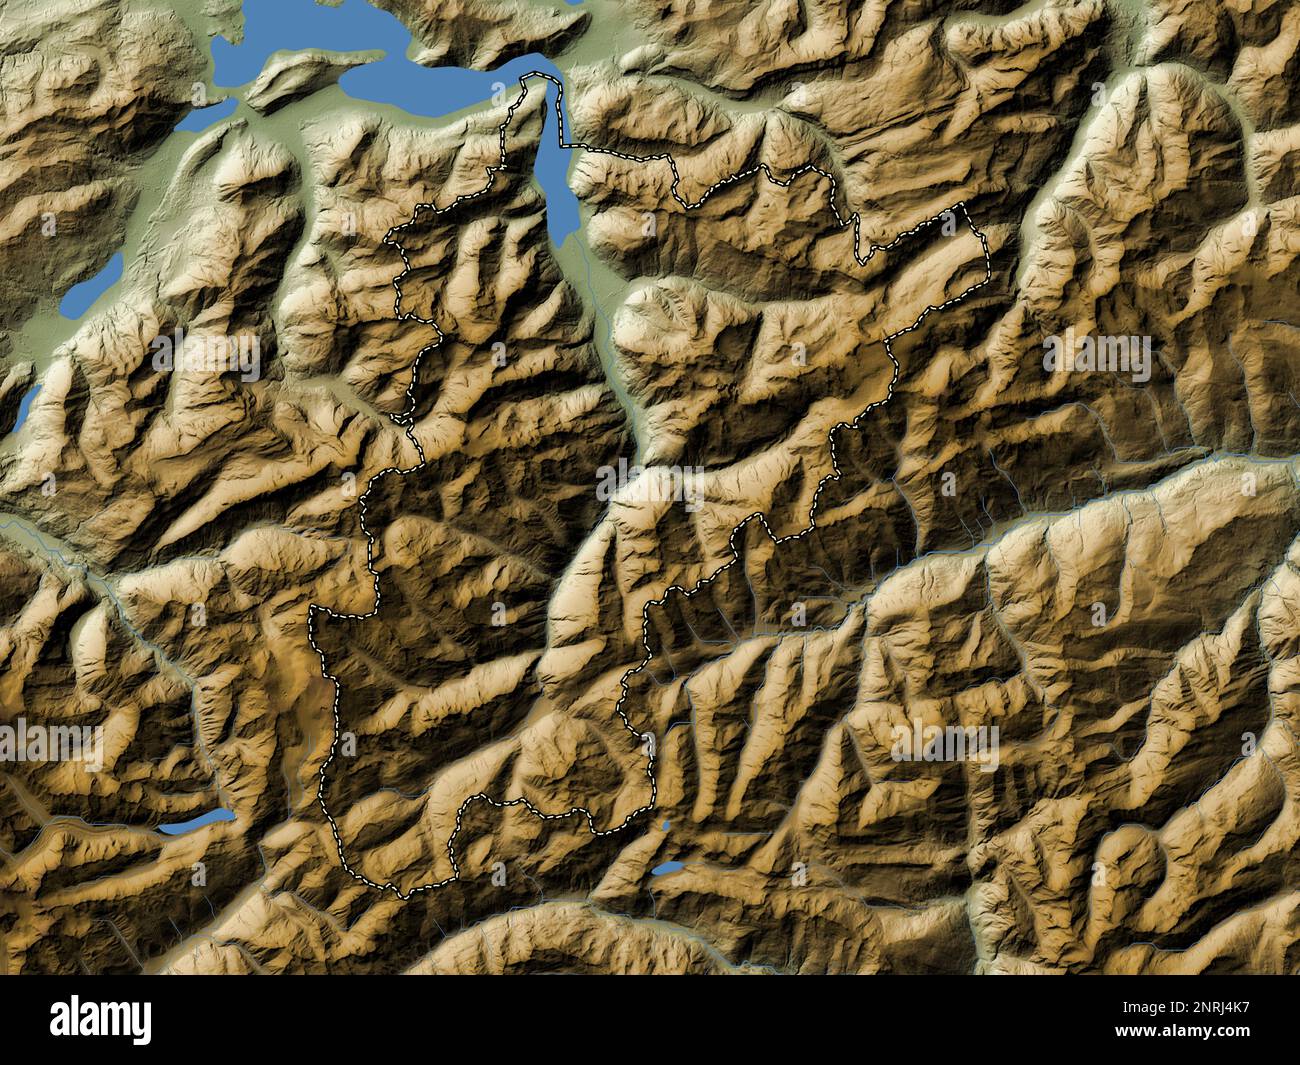 Uri, canton of Switzerland. Colored elevation map with lakes and rivers Stock Photo